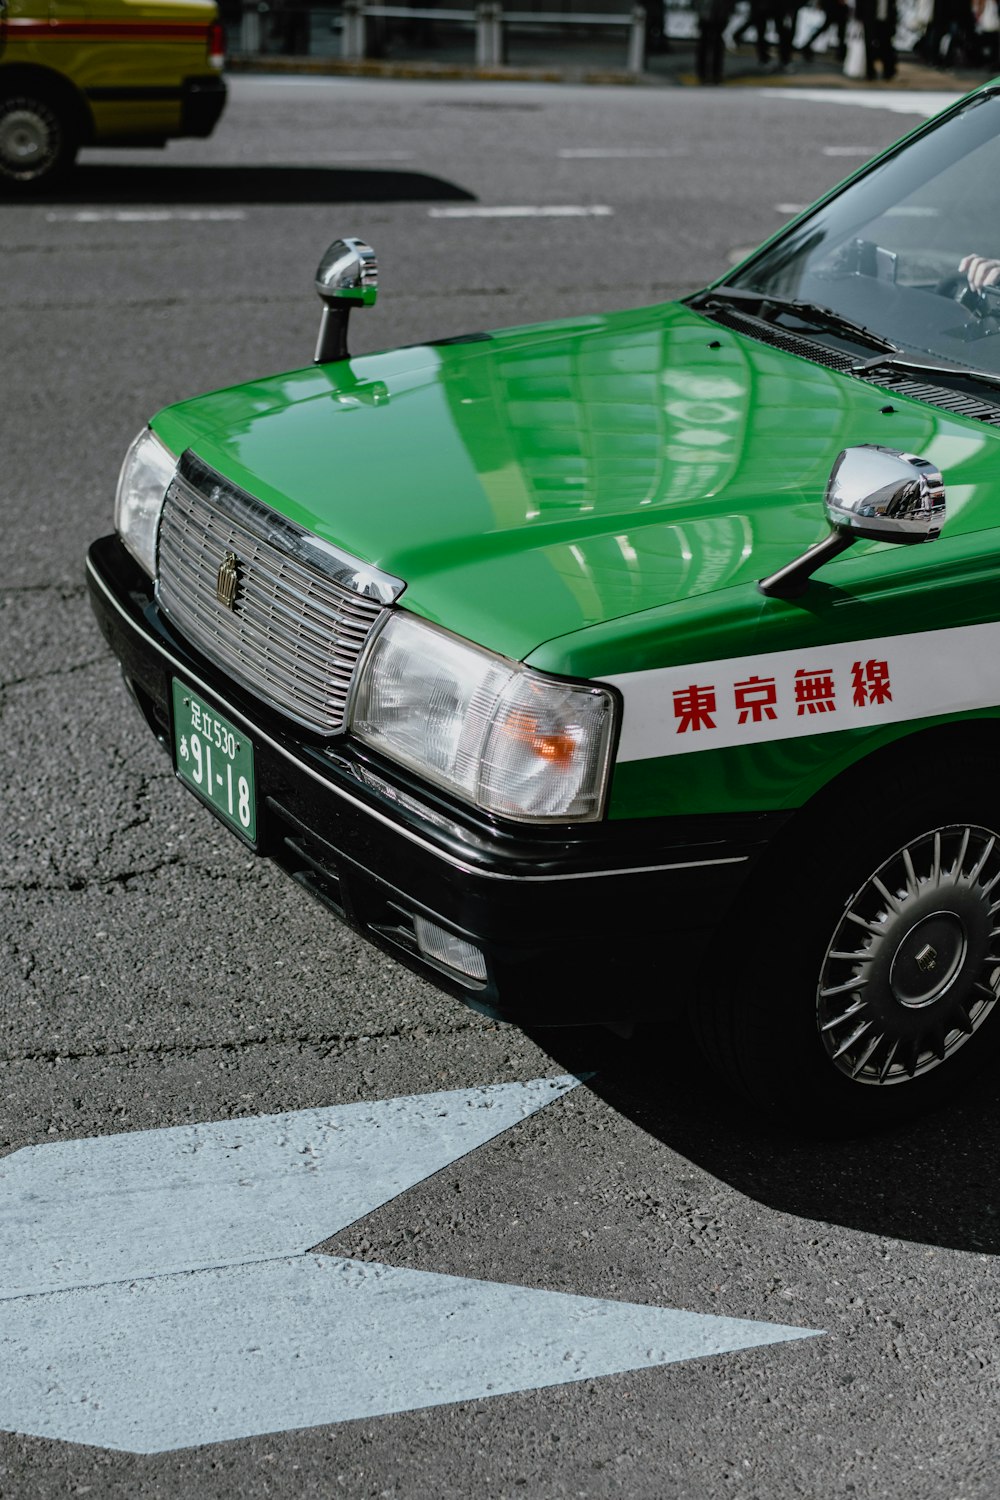 a green taxi cab parked in a parking lot